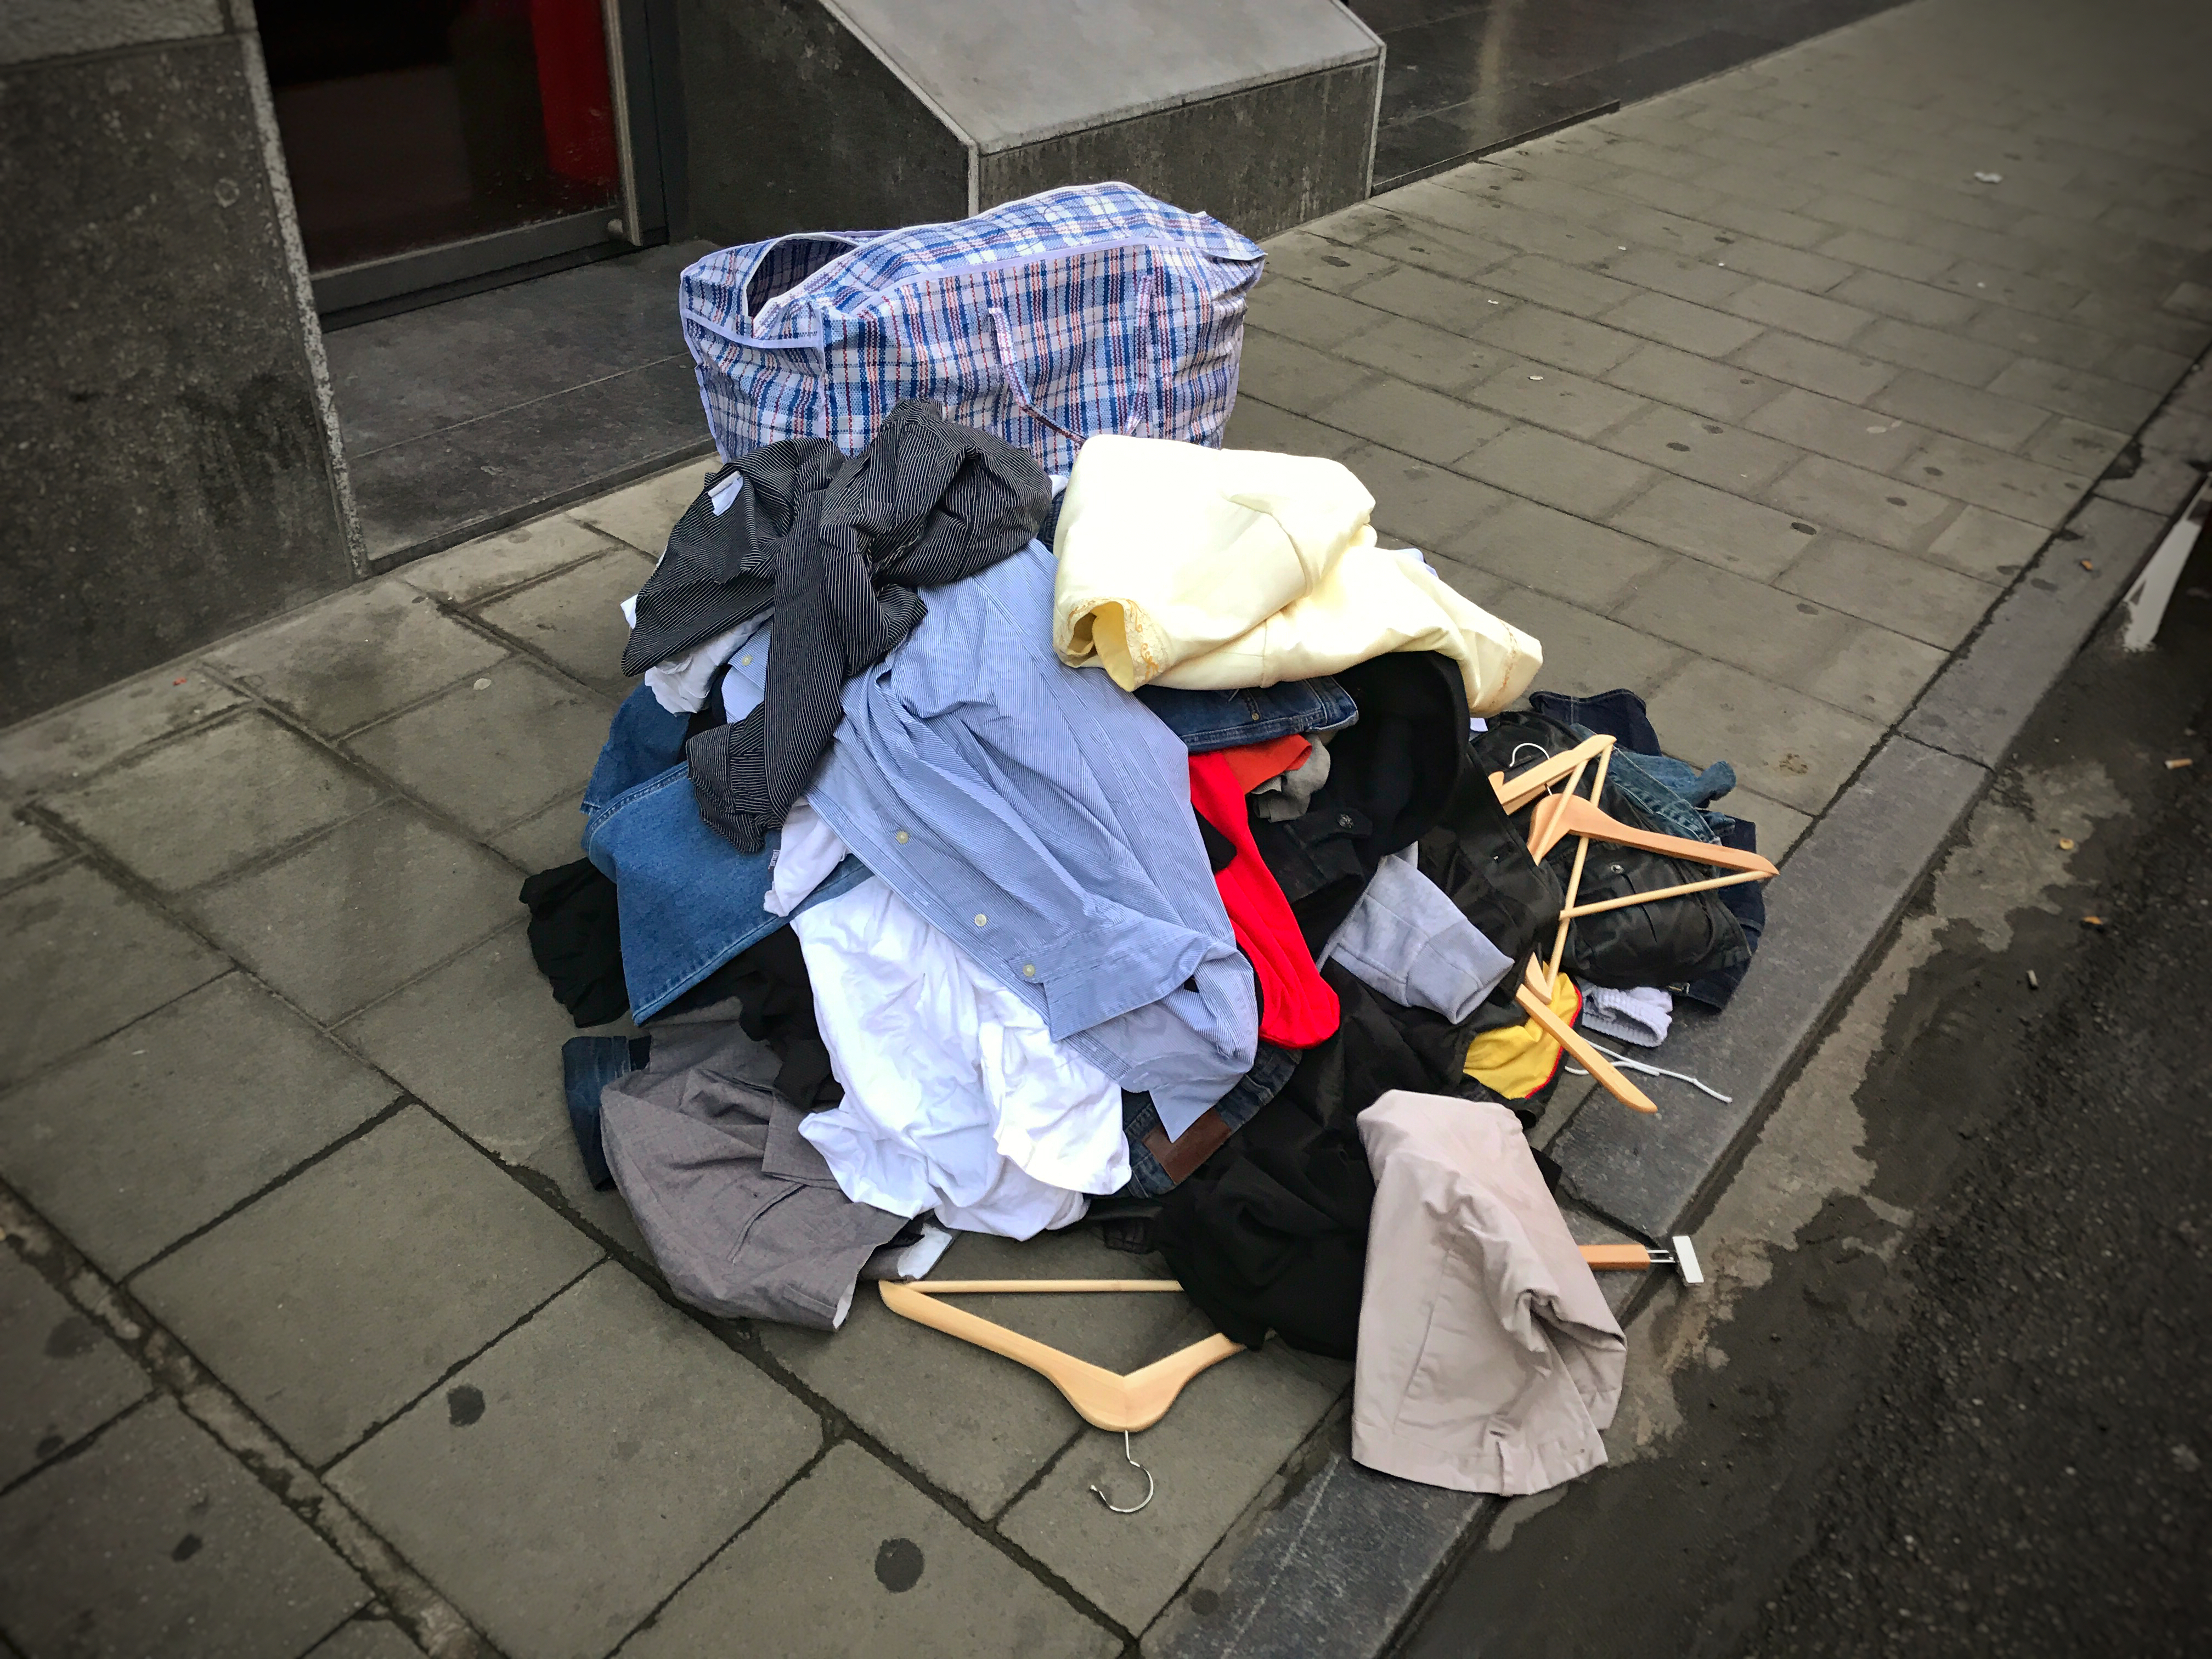 Pile of Clothes on Sidewalk. | Source: Shutterstock